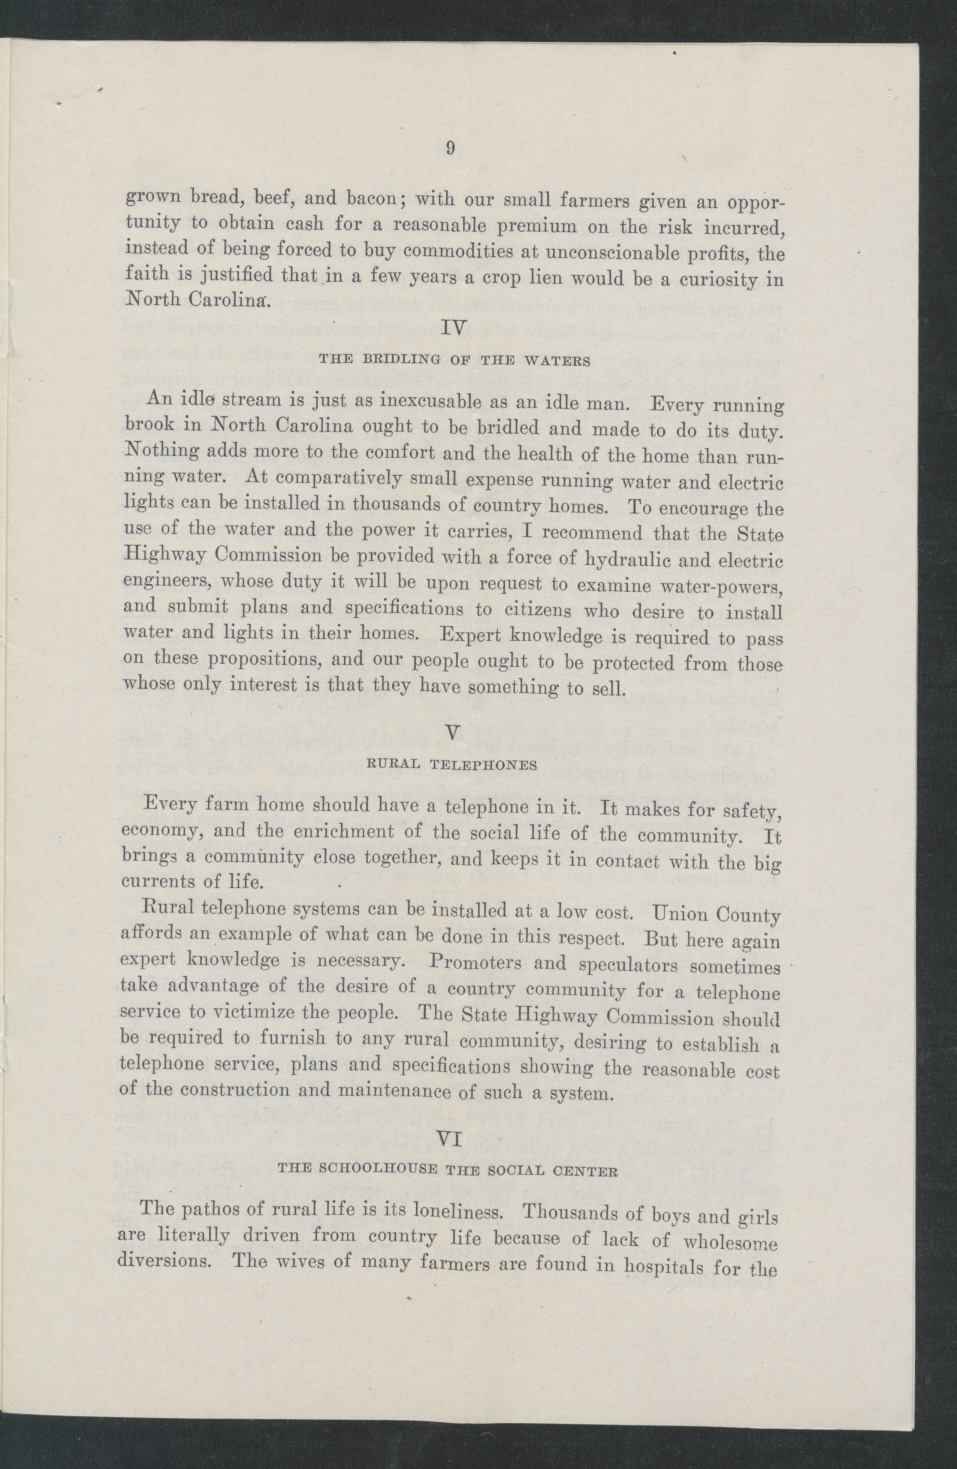 Inaugural Address of Governor Thomas W. Bickett to the General Assembly, January 11, 1917, page 7